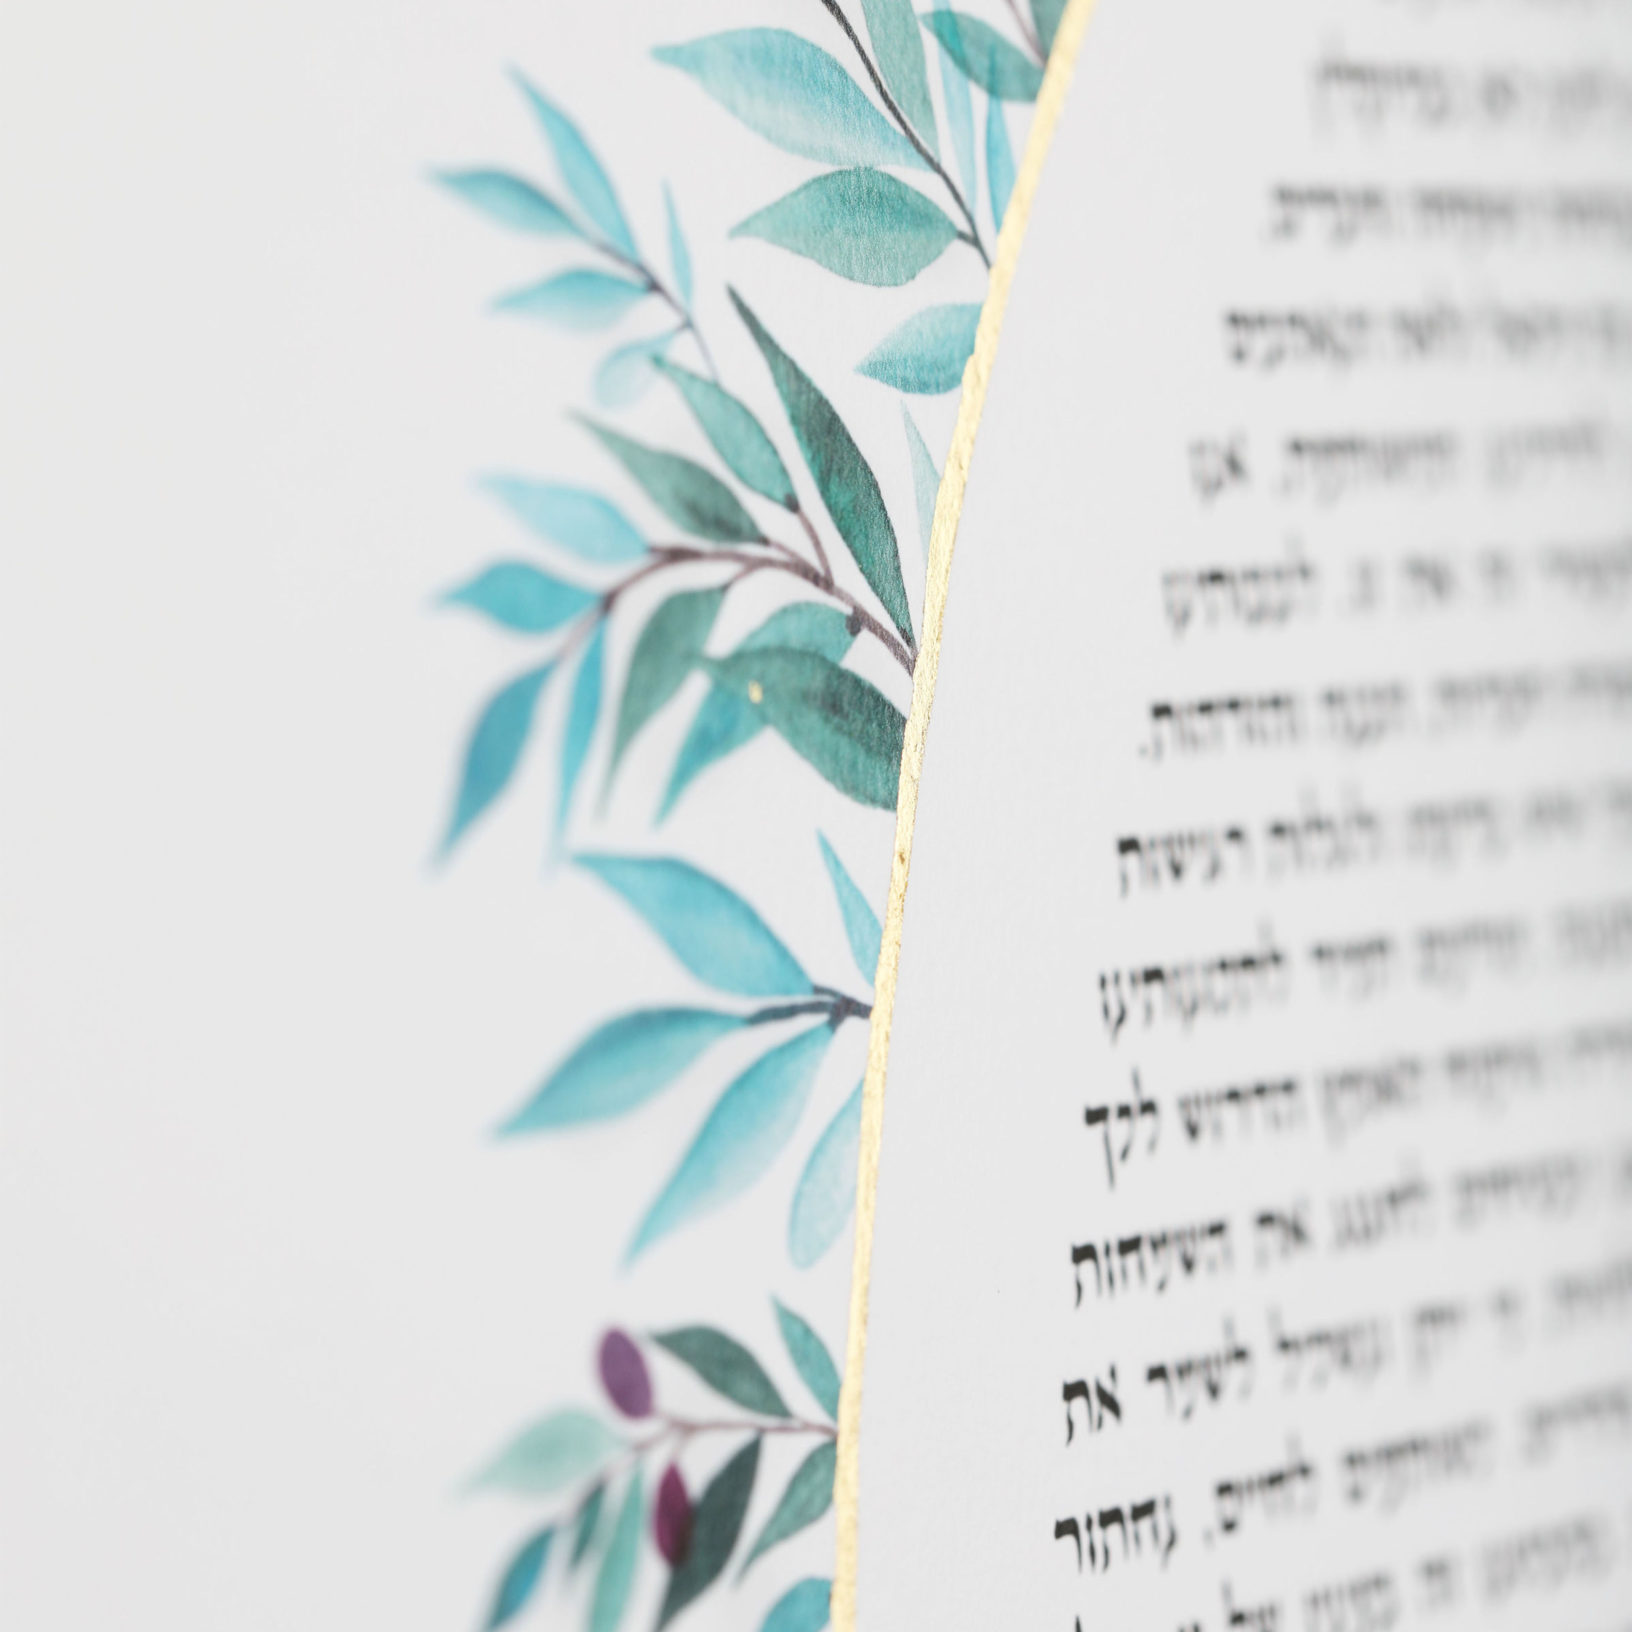 Ori Snir Gold & Silver Zohar Elipse - Gold Leaf White Ketubah Marriage Contracts